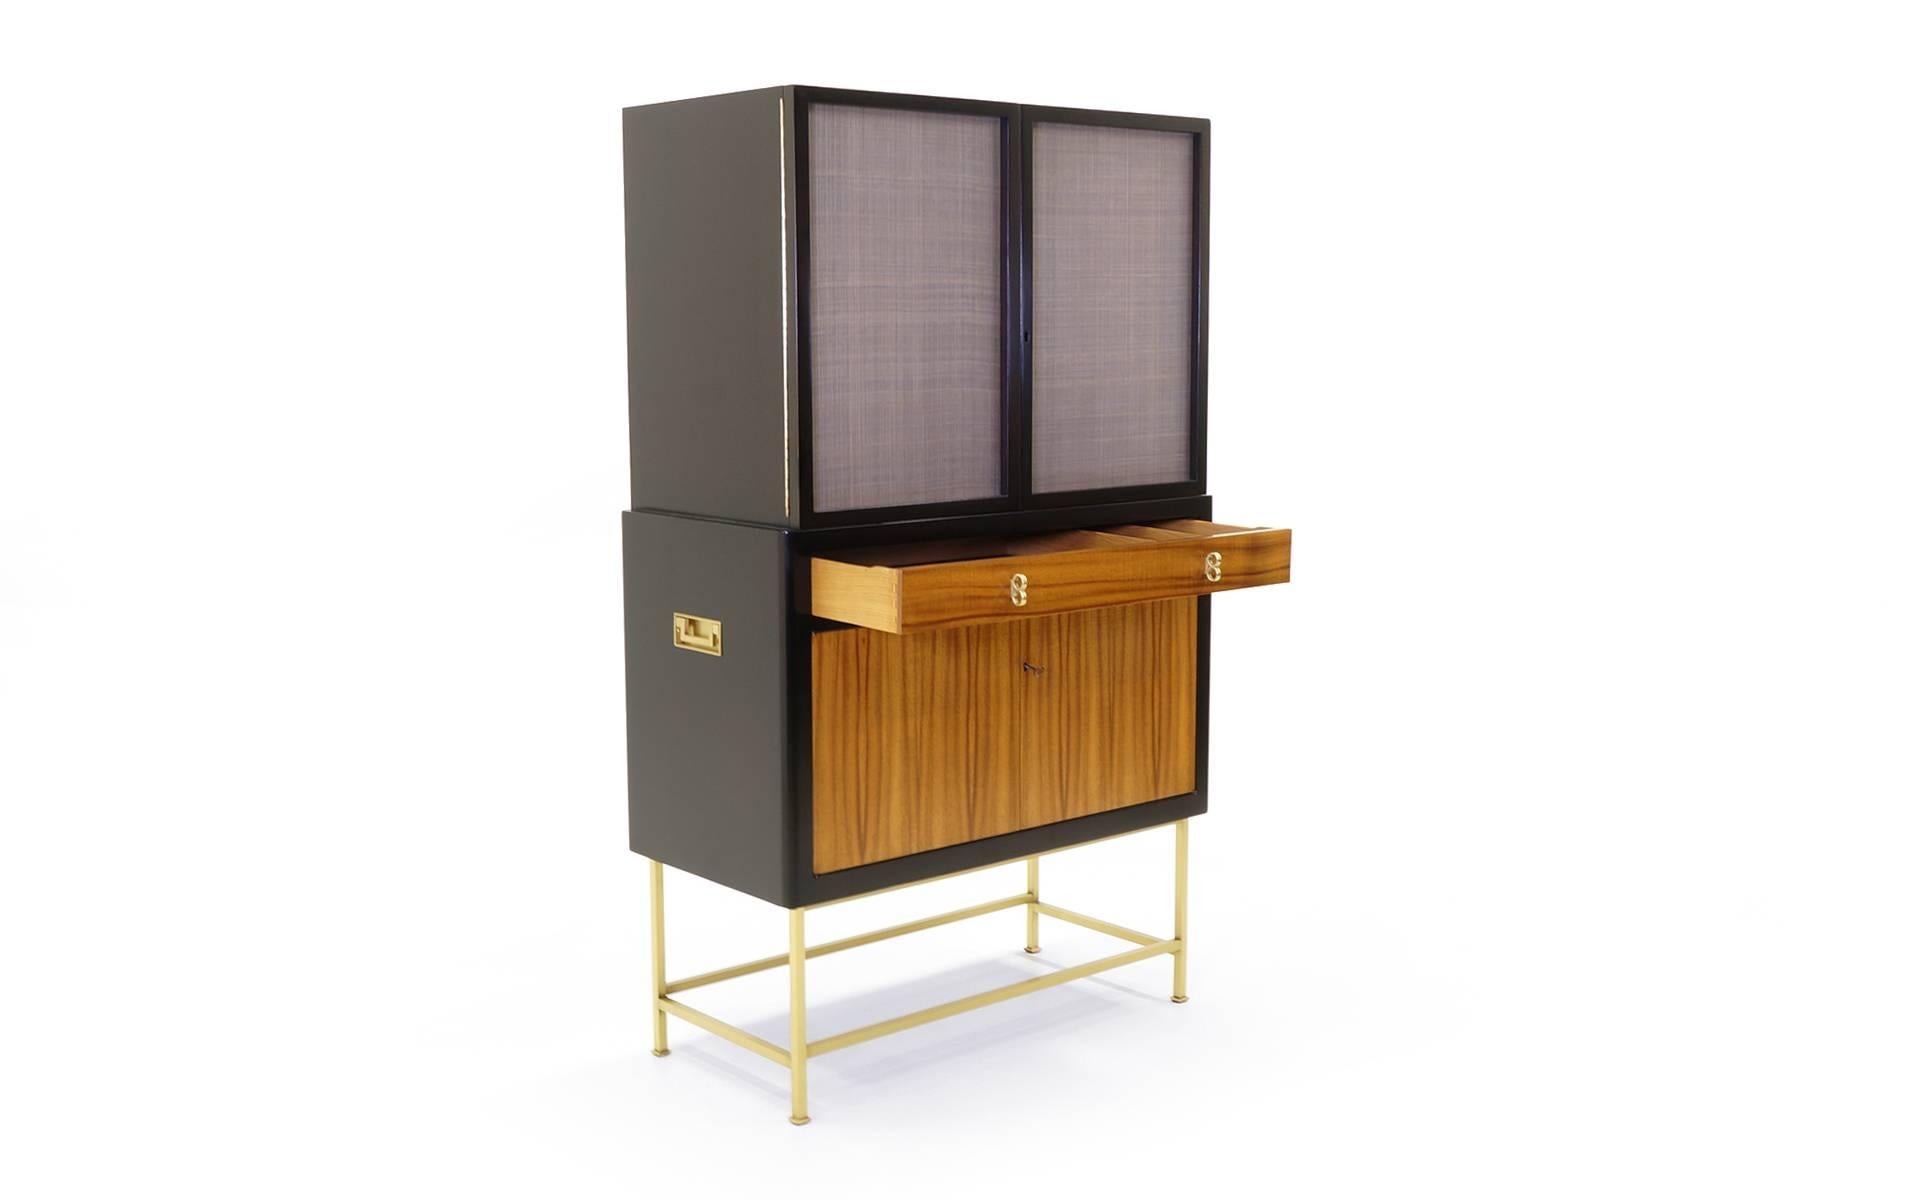 Exceptional Edward Wormley for Dunbar bar cabinet. Large-scale cabinet of dark and bleached African mahogany on a base of solid brass tubing. The upper cabinet is lighted and features locking doors with two adjustable glass shelves. The upper doors